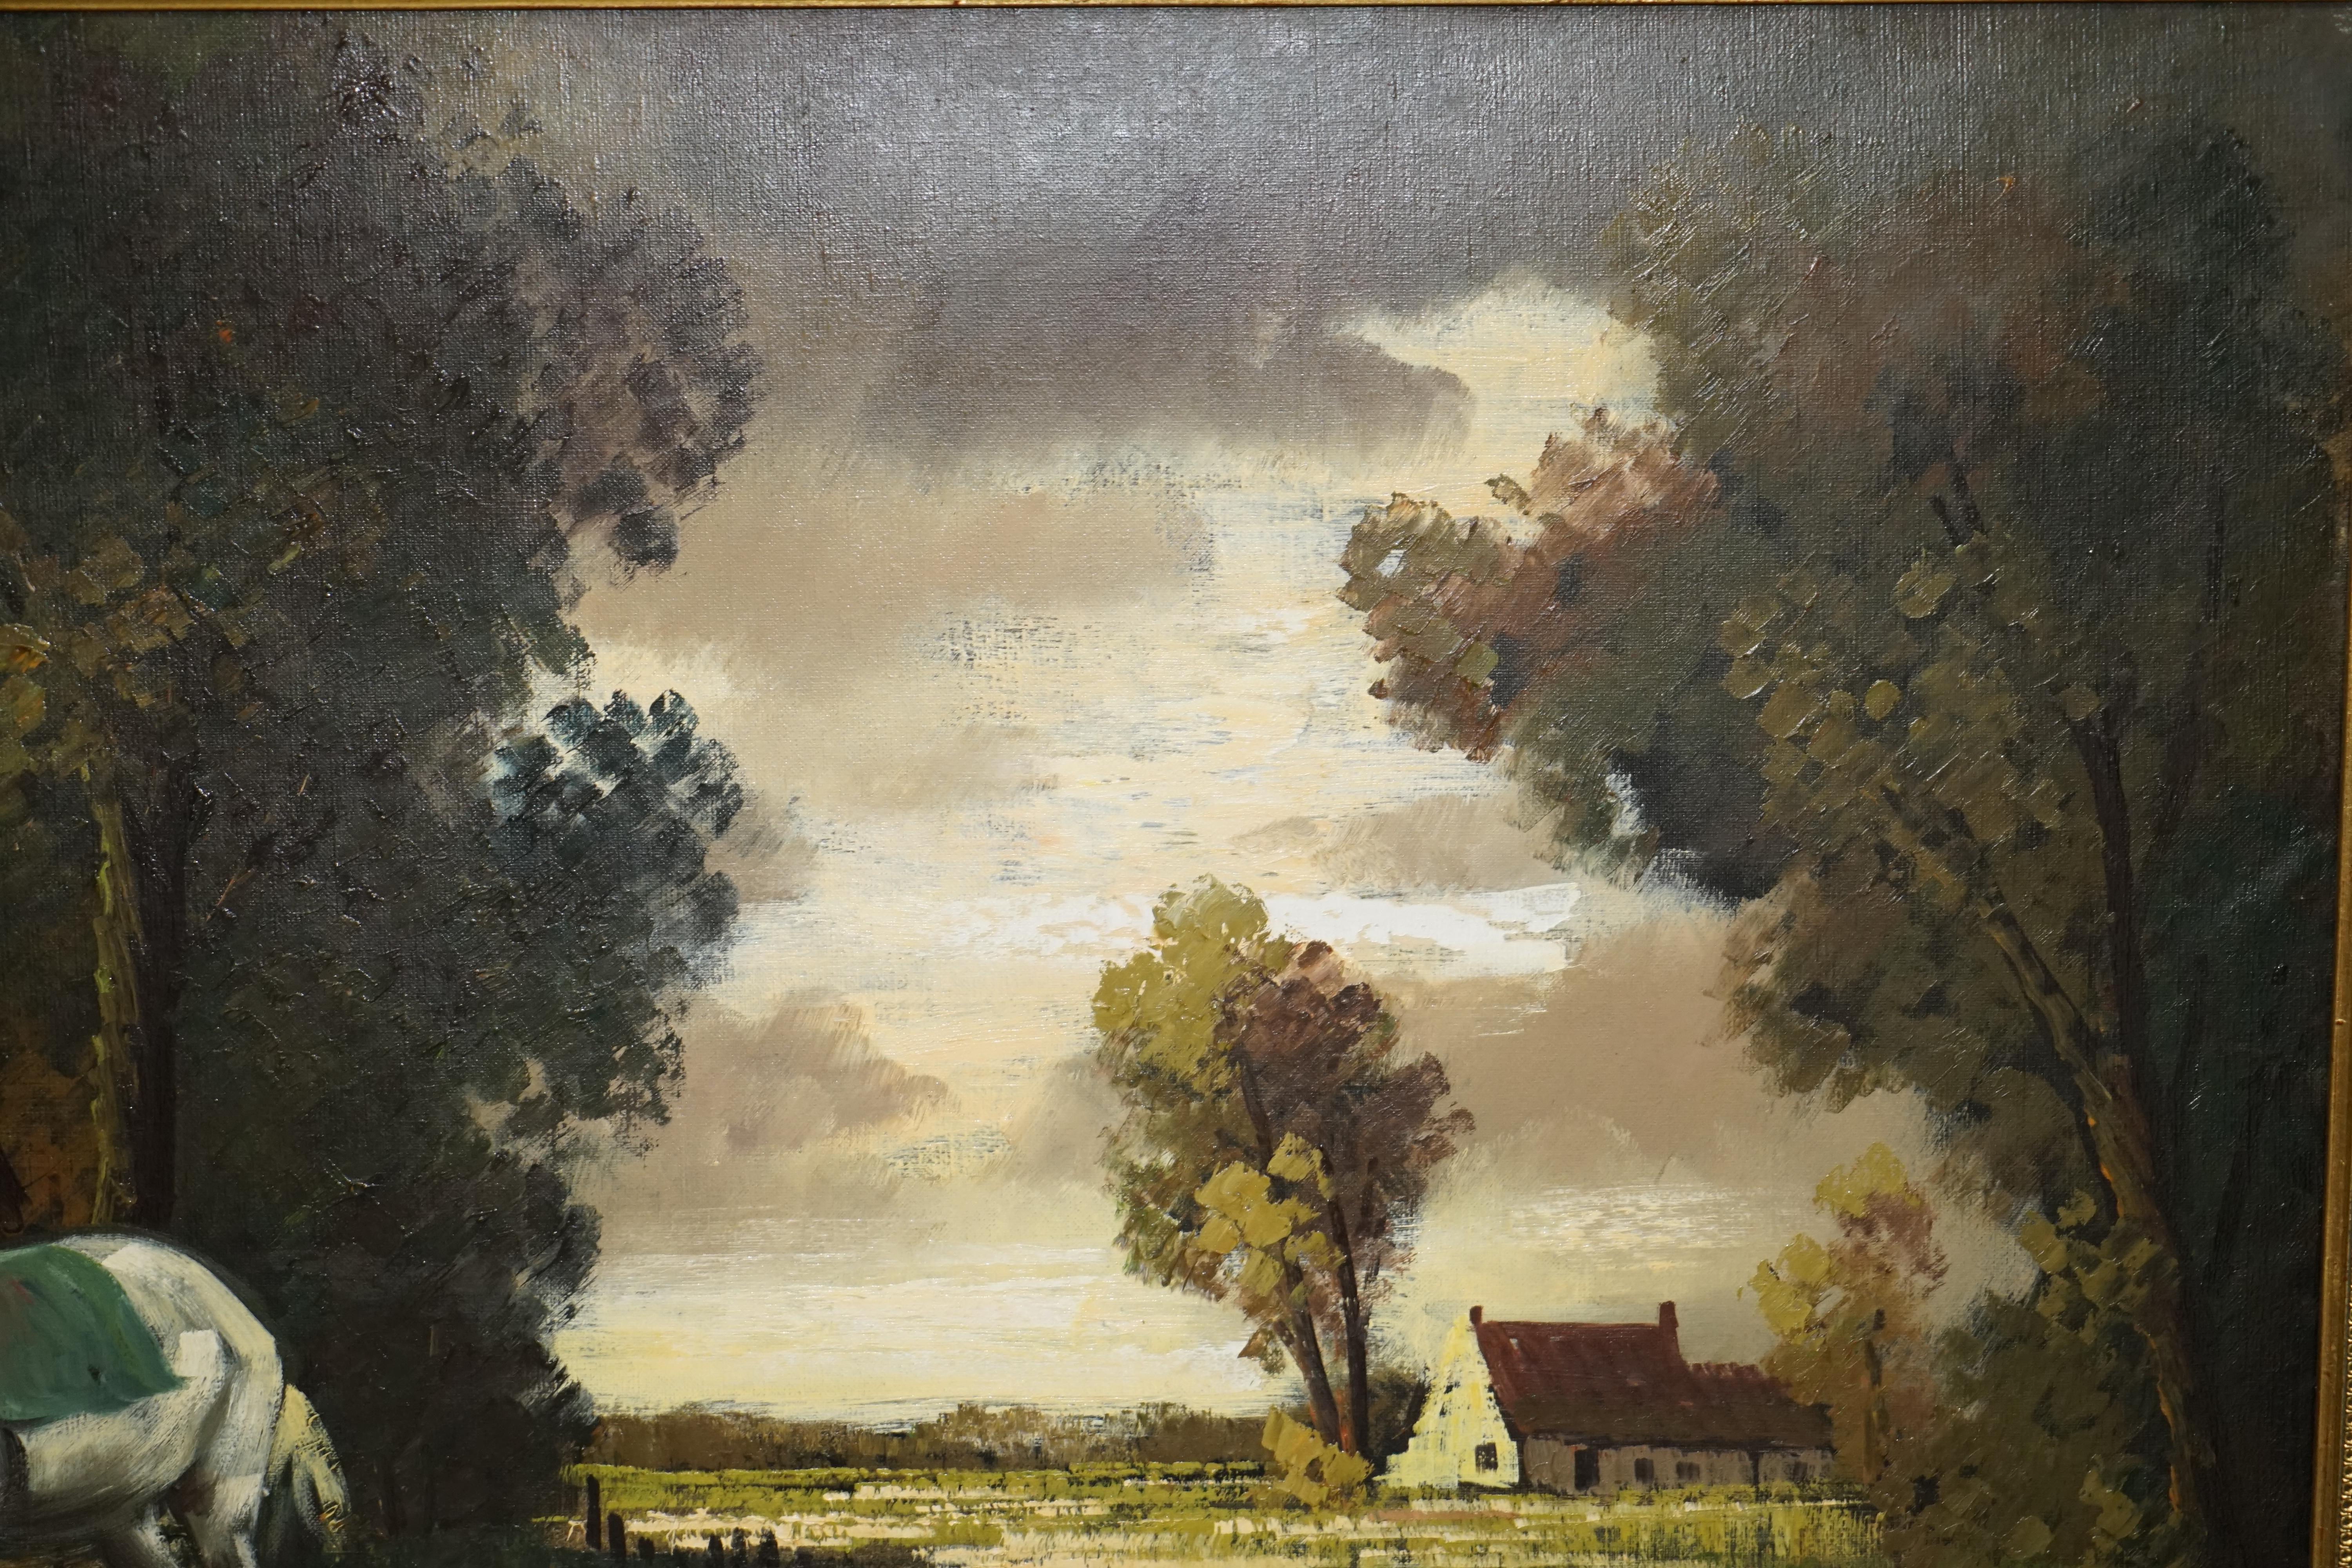 EXTRA LARGE 159X94CM H. VERBEELK SiGNED OIL PAINTING OF A RURAL SCENE WITH HORSE For Sale 7